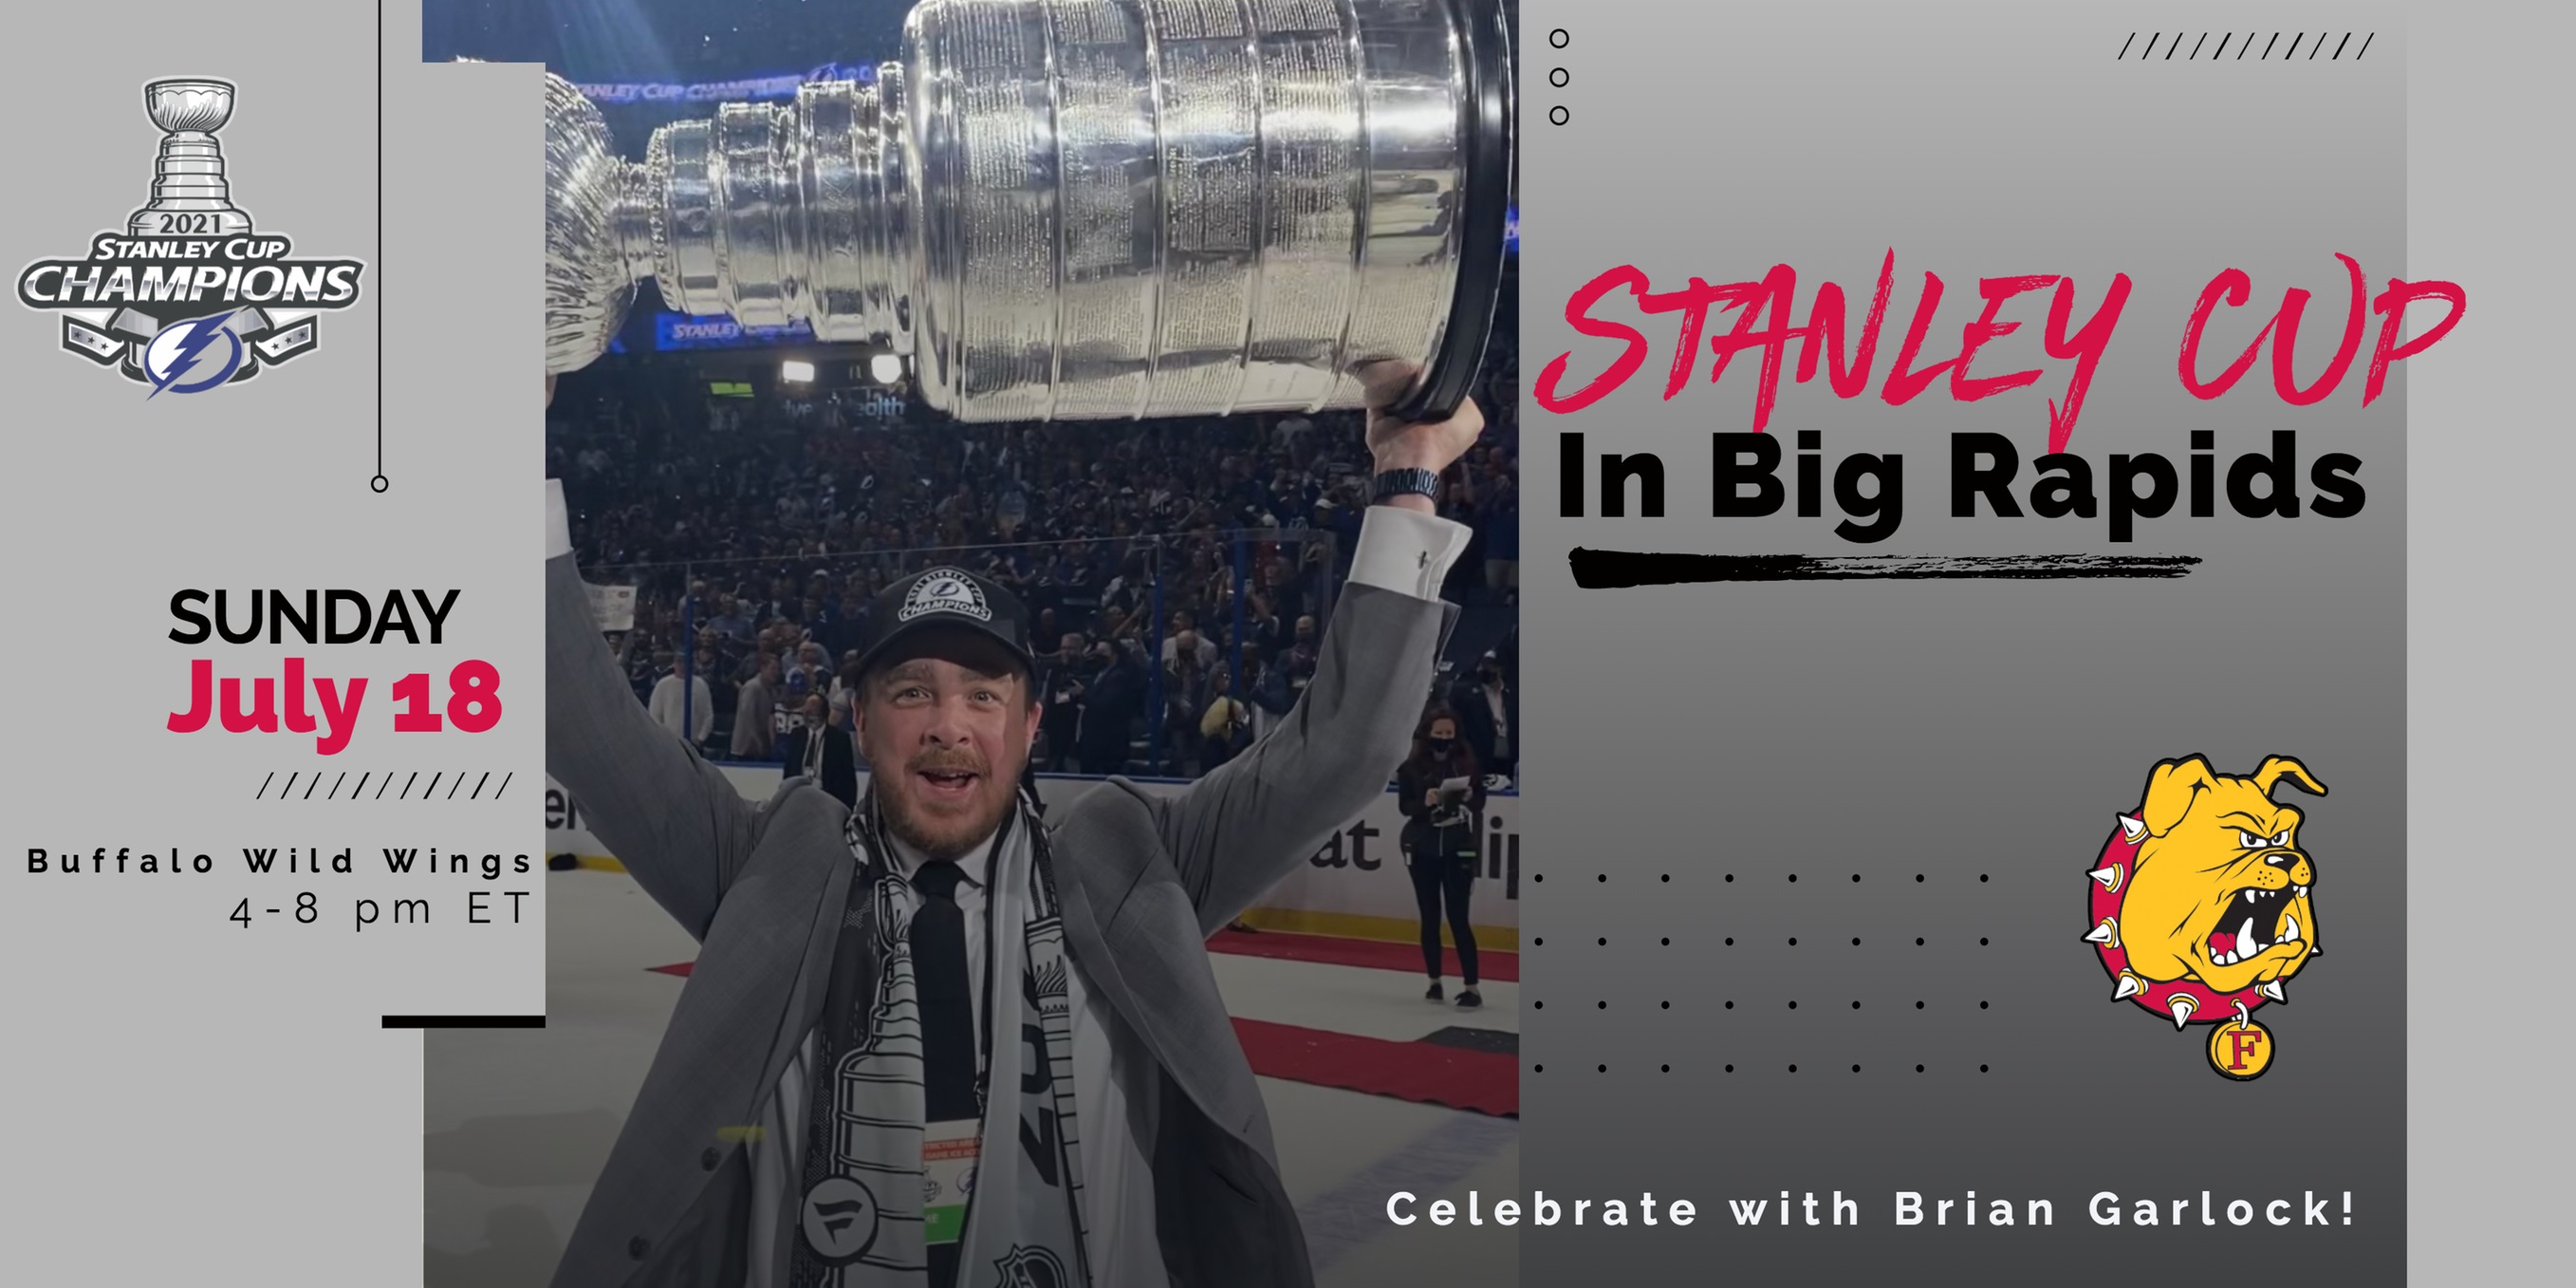 Brian Garlock To Bring Stanley Cup To Big Rapids This Sunday!